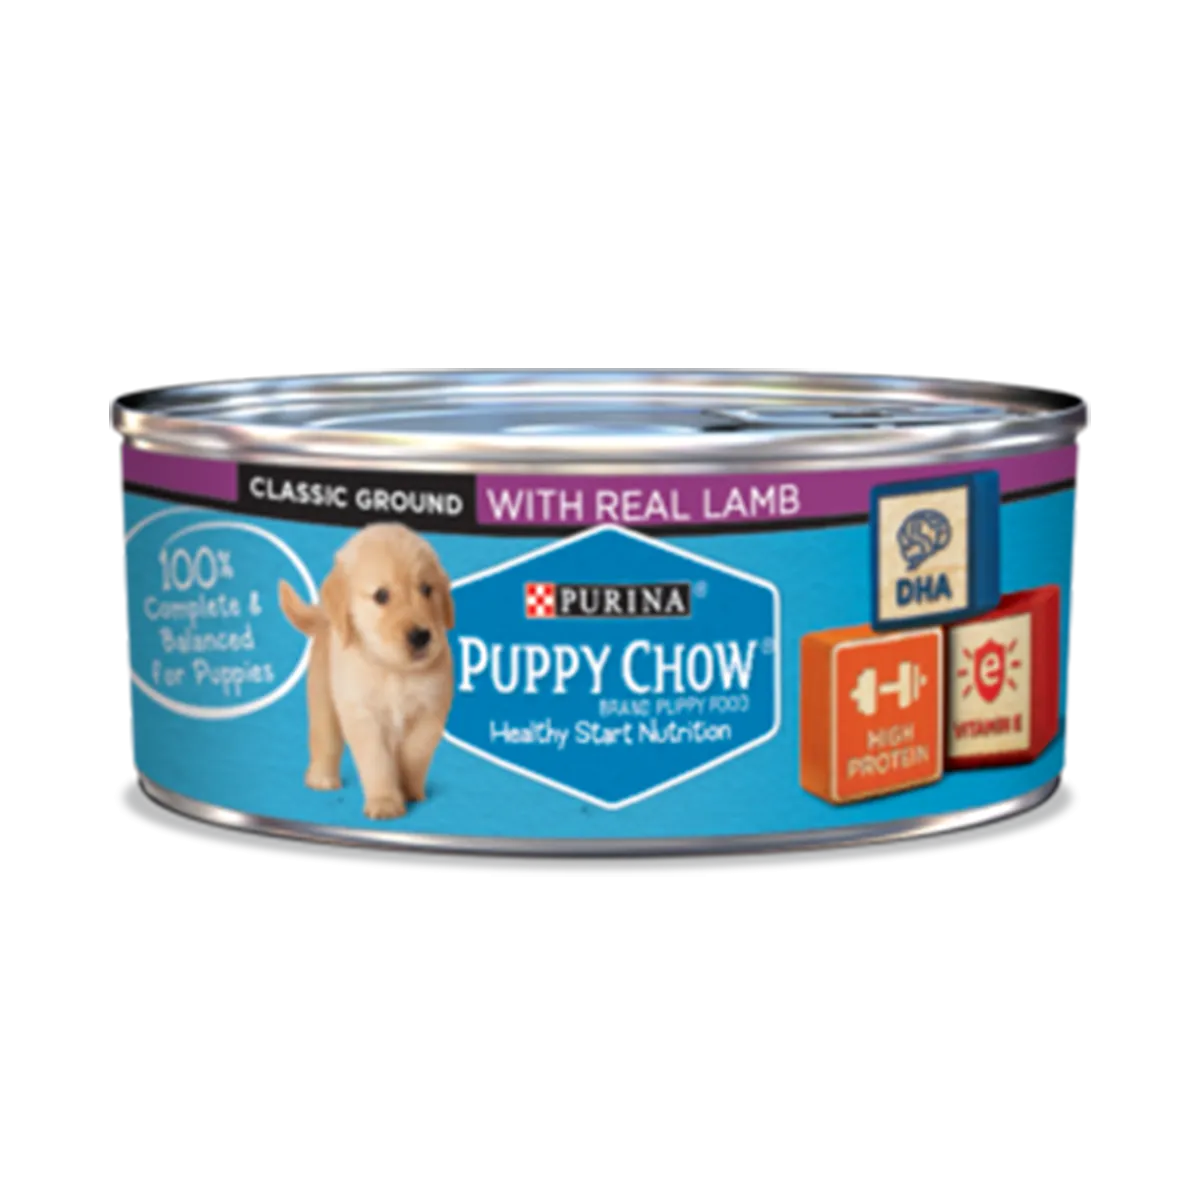 purina-puppy-chow-lamb-wet-puppy-food